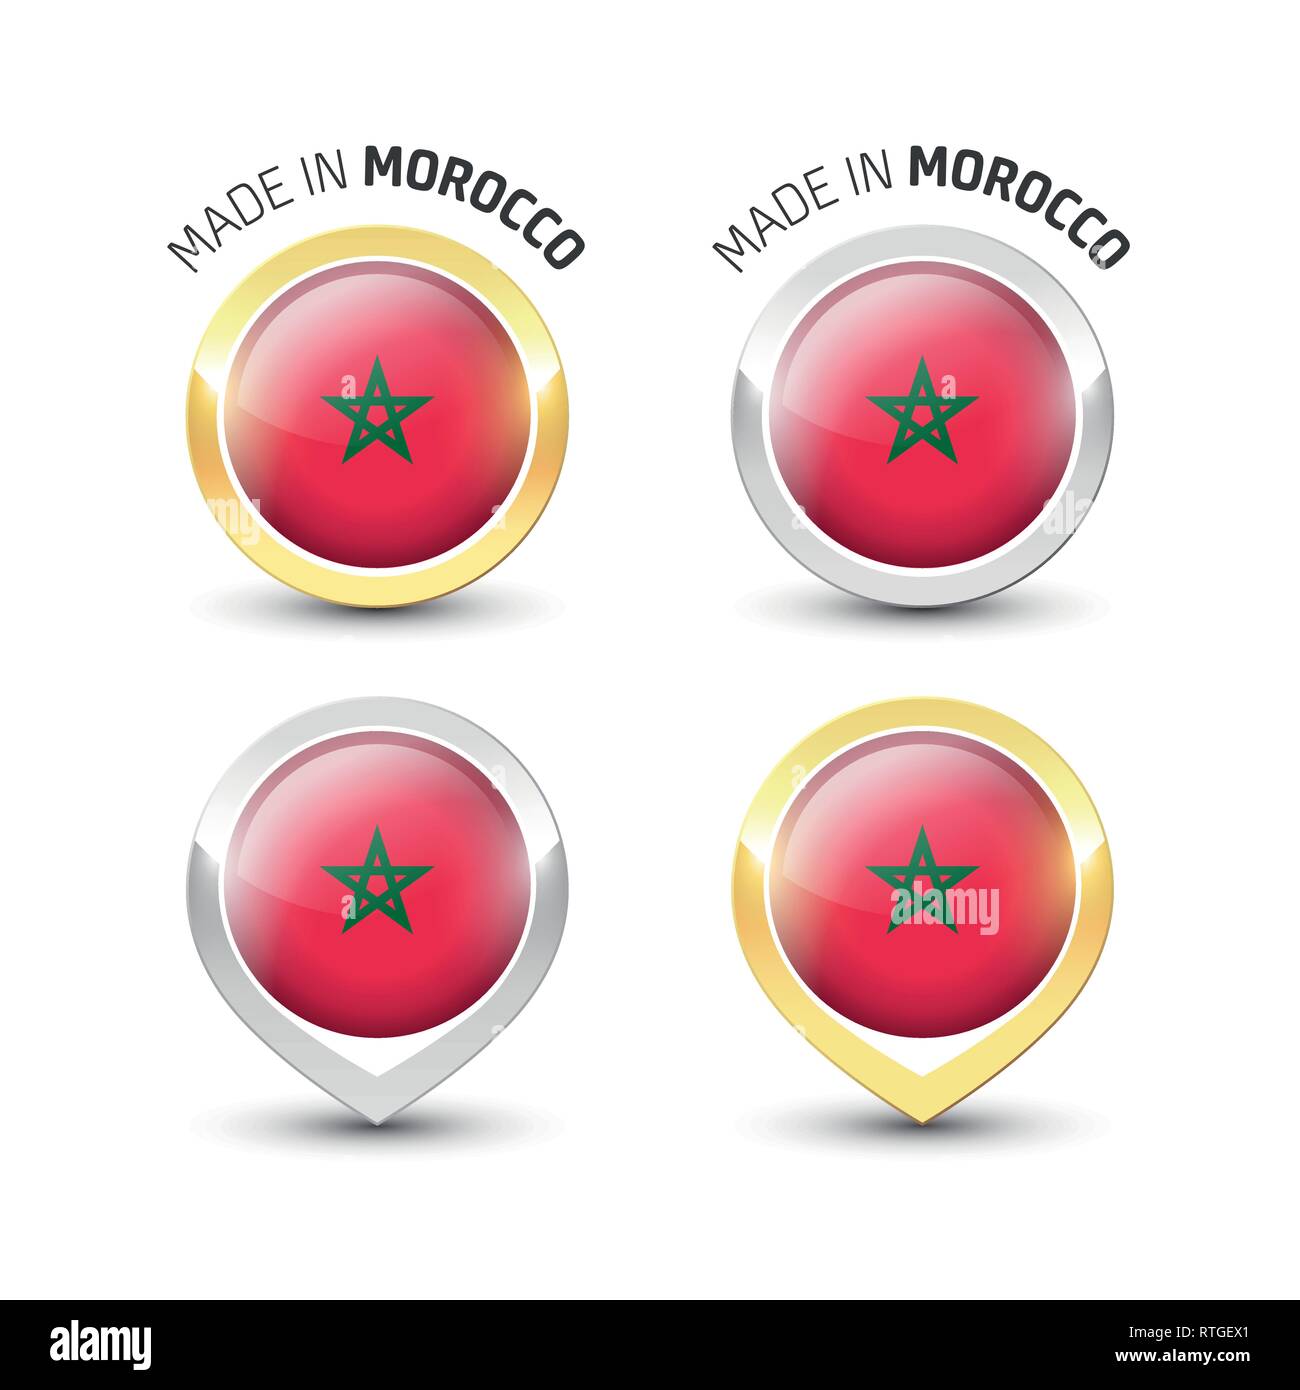 Made in Morocco - Guarantee label with the Moroccan flag inside round gold and silver icons. Stock Vector